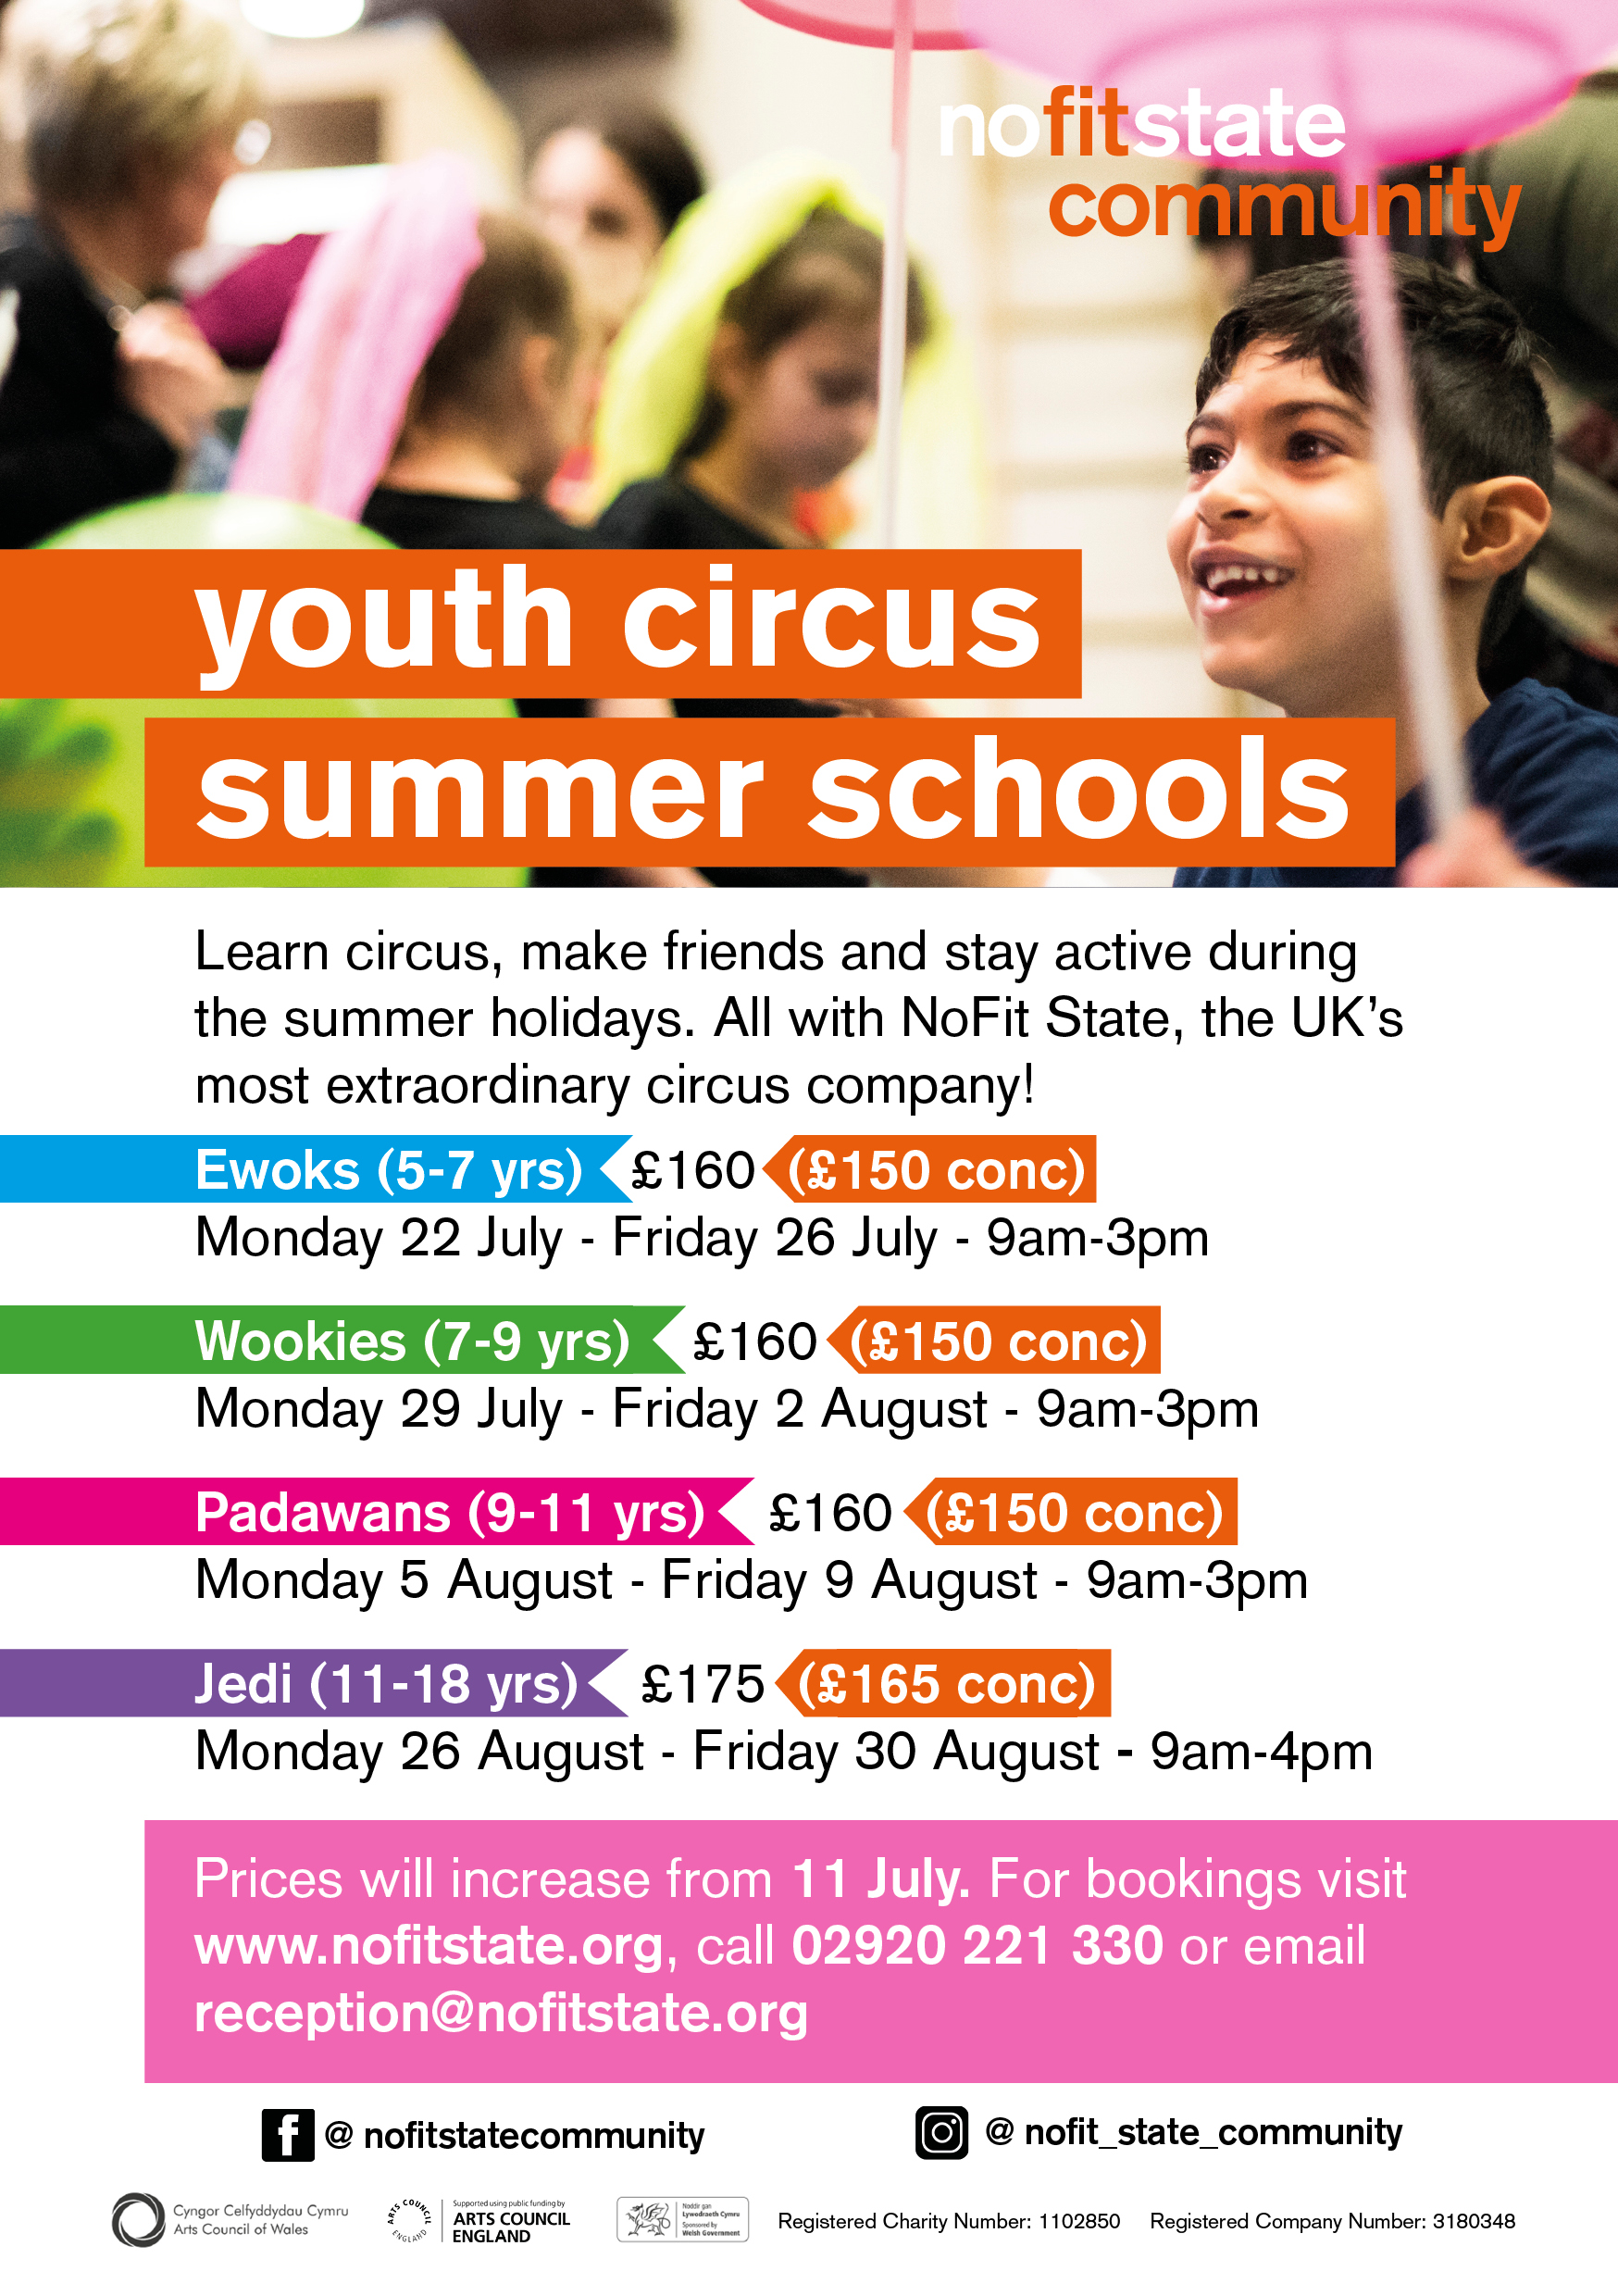 Youth circus summer schools